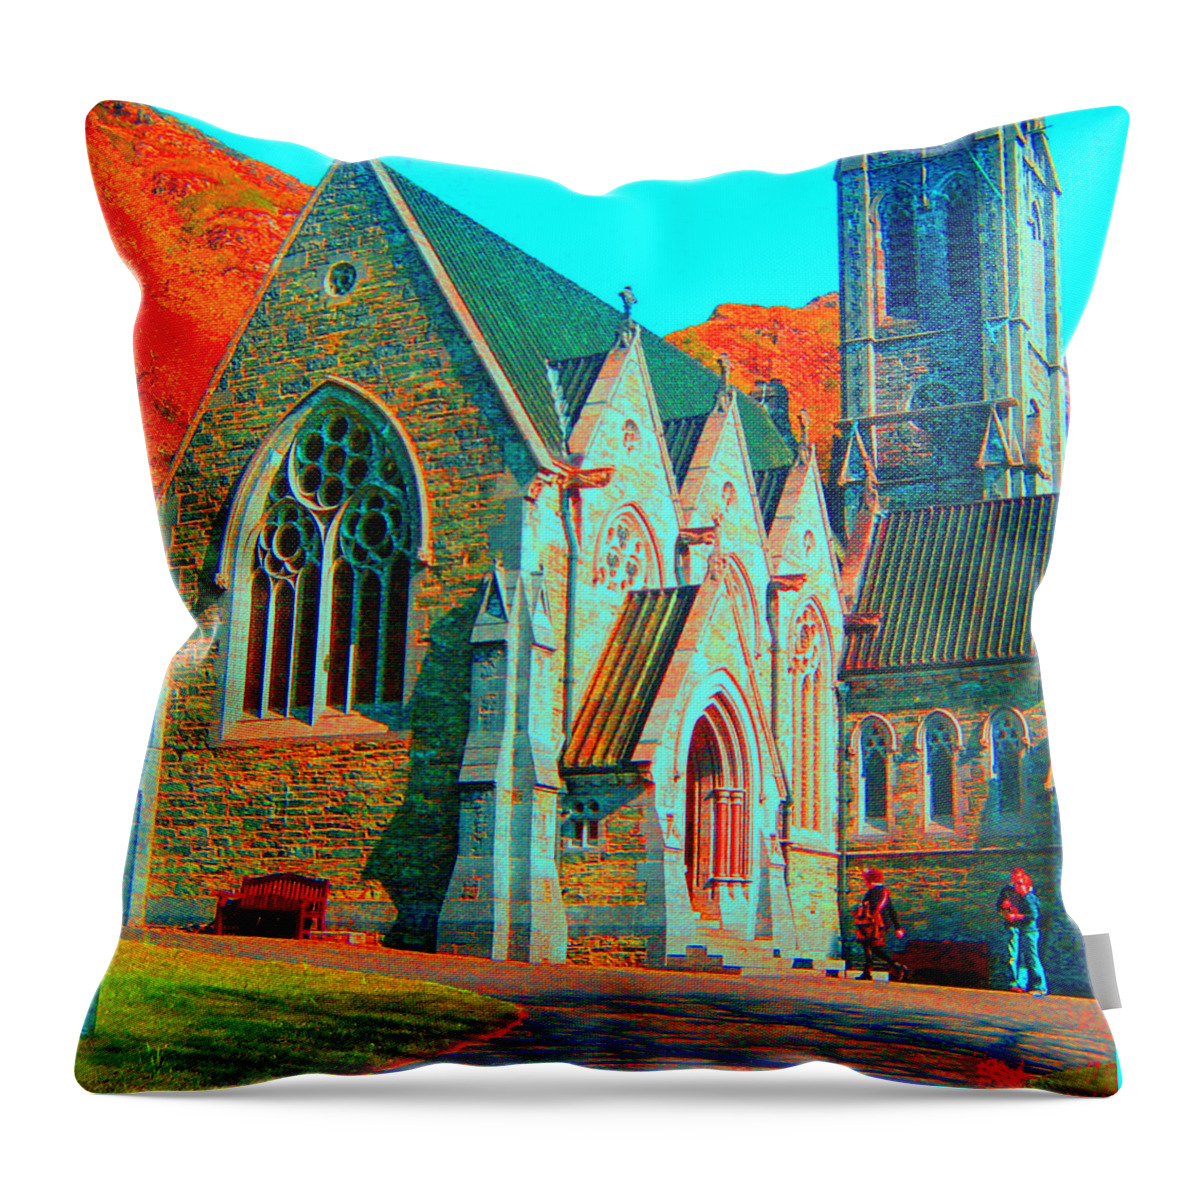 Kylemore Throw Pillow featuring the photograph Kylemore Gothic Church by Martin Masterson